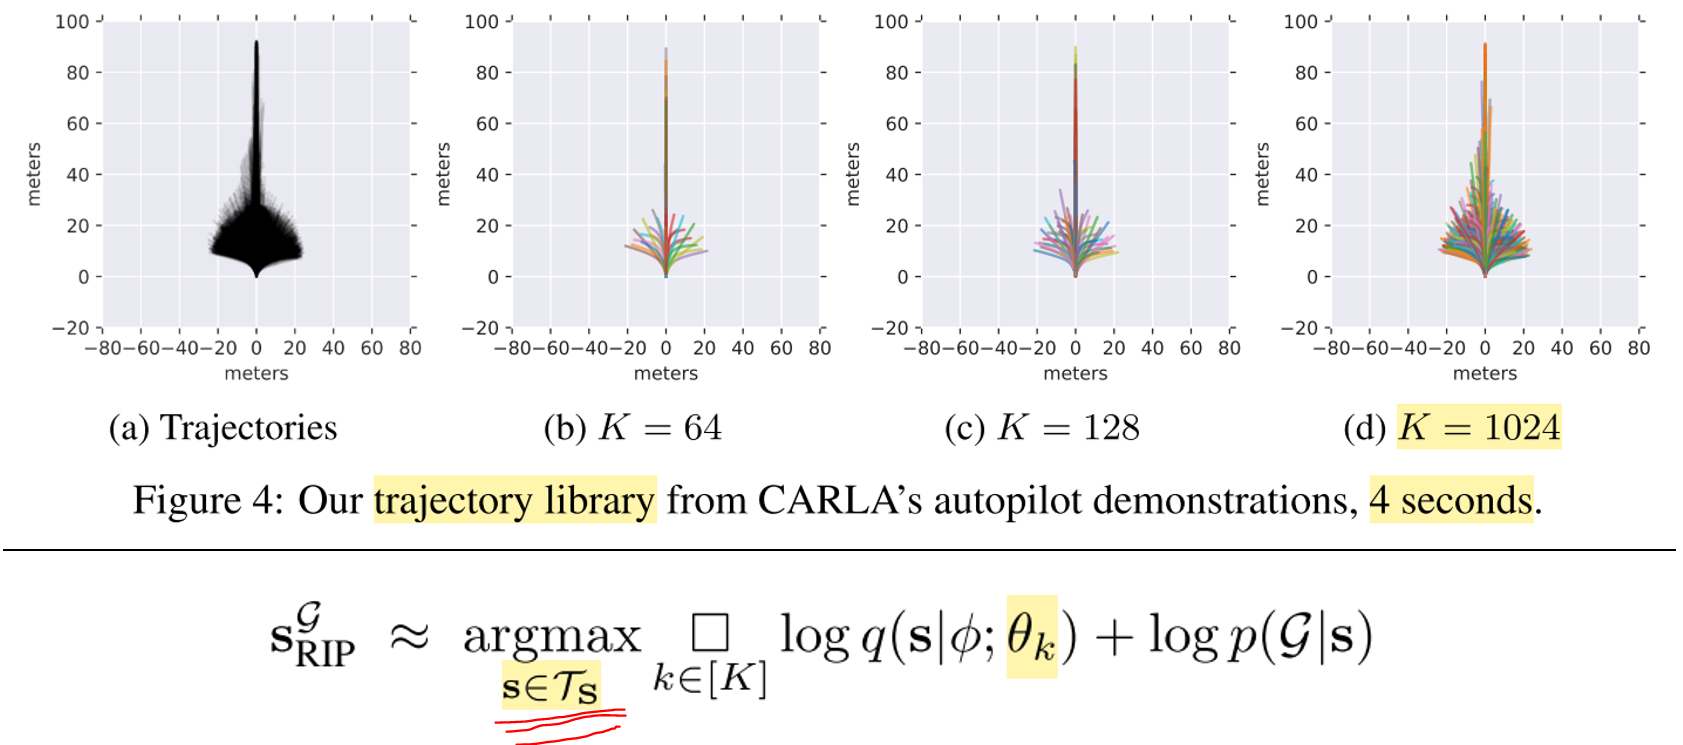 To save computation and improve runtime to real-time, the authors use a trajectory library: they perform K-means clustering of the expert plan’s from the training distribution and keep 128 of the centroids. I see that as a way restrict the search in the trajectory space, similar to injecting expert knowledge about the feasibility of cars trajectories. Source.